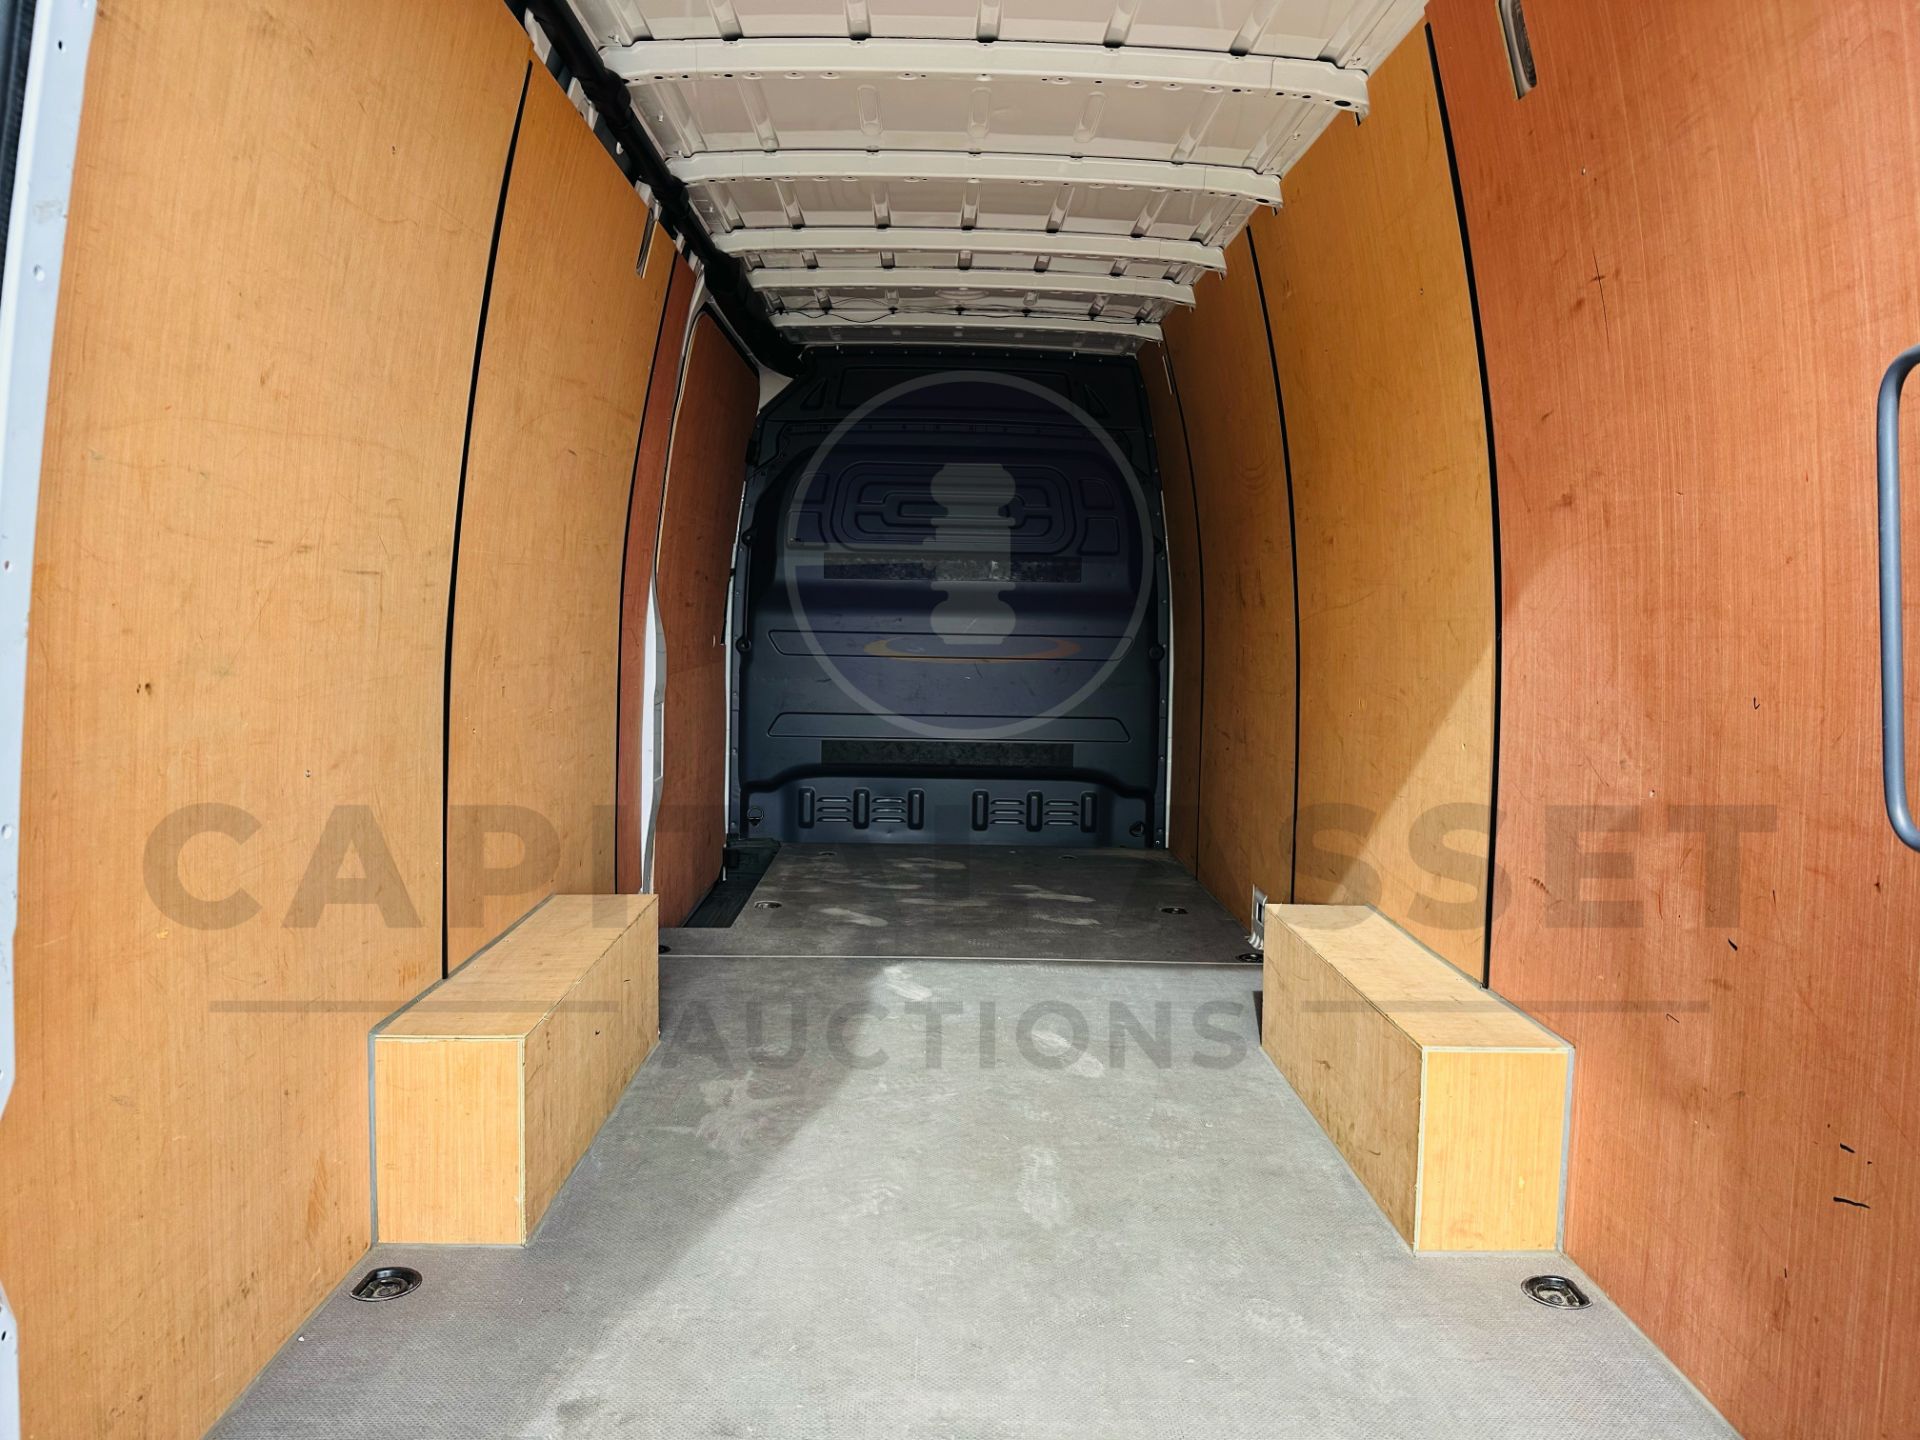 (ON SALE) MERCEDES-BENZ SPRINTER 315 CDI *PREMIUM EDITION* LWB HI-ROOF (2023) *A/C* (ONLY 15K MILES) - Image 13 of 31